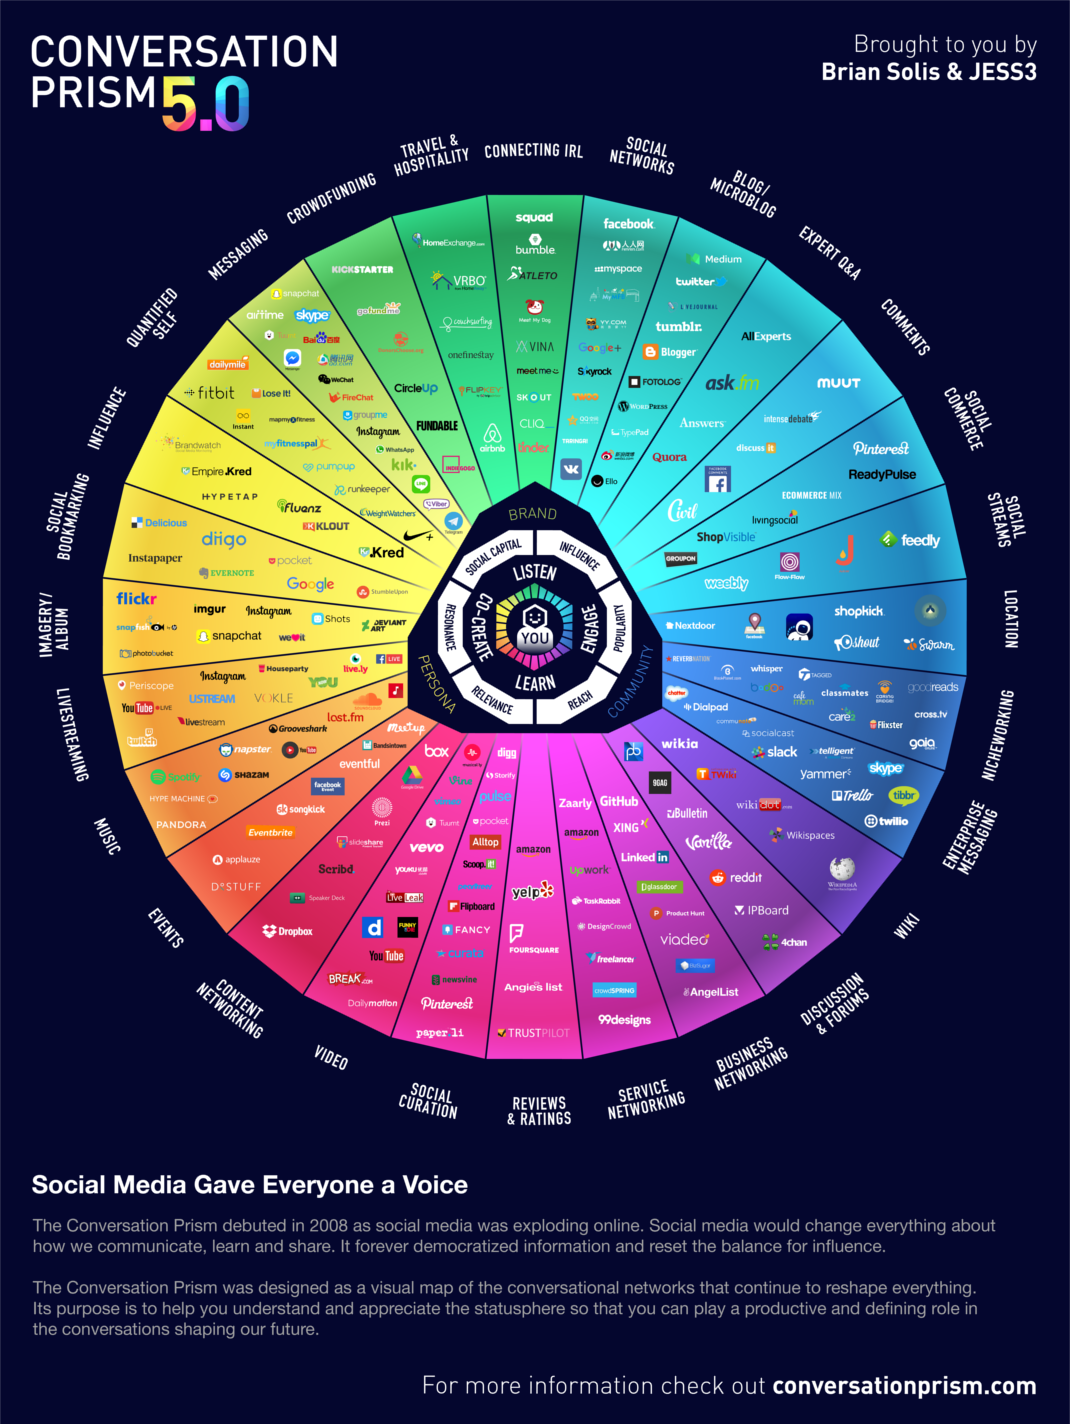 A Stunning Visual Map of the Social Media Universe